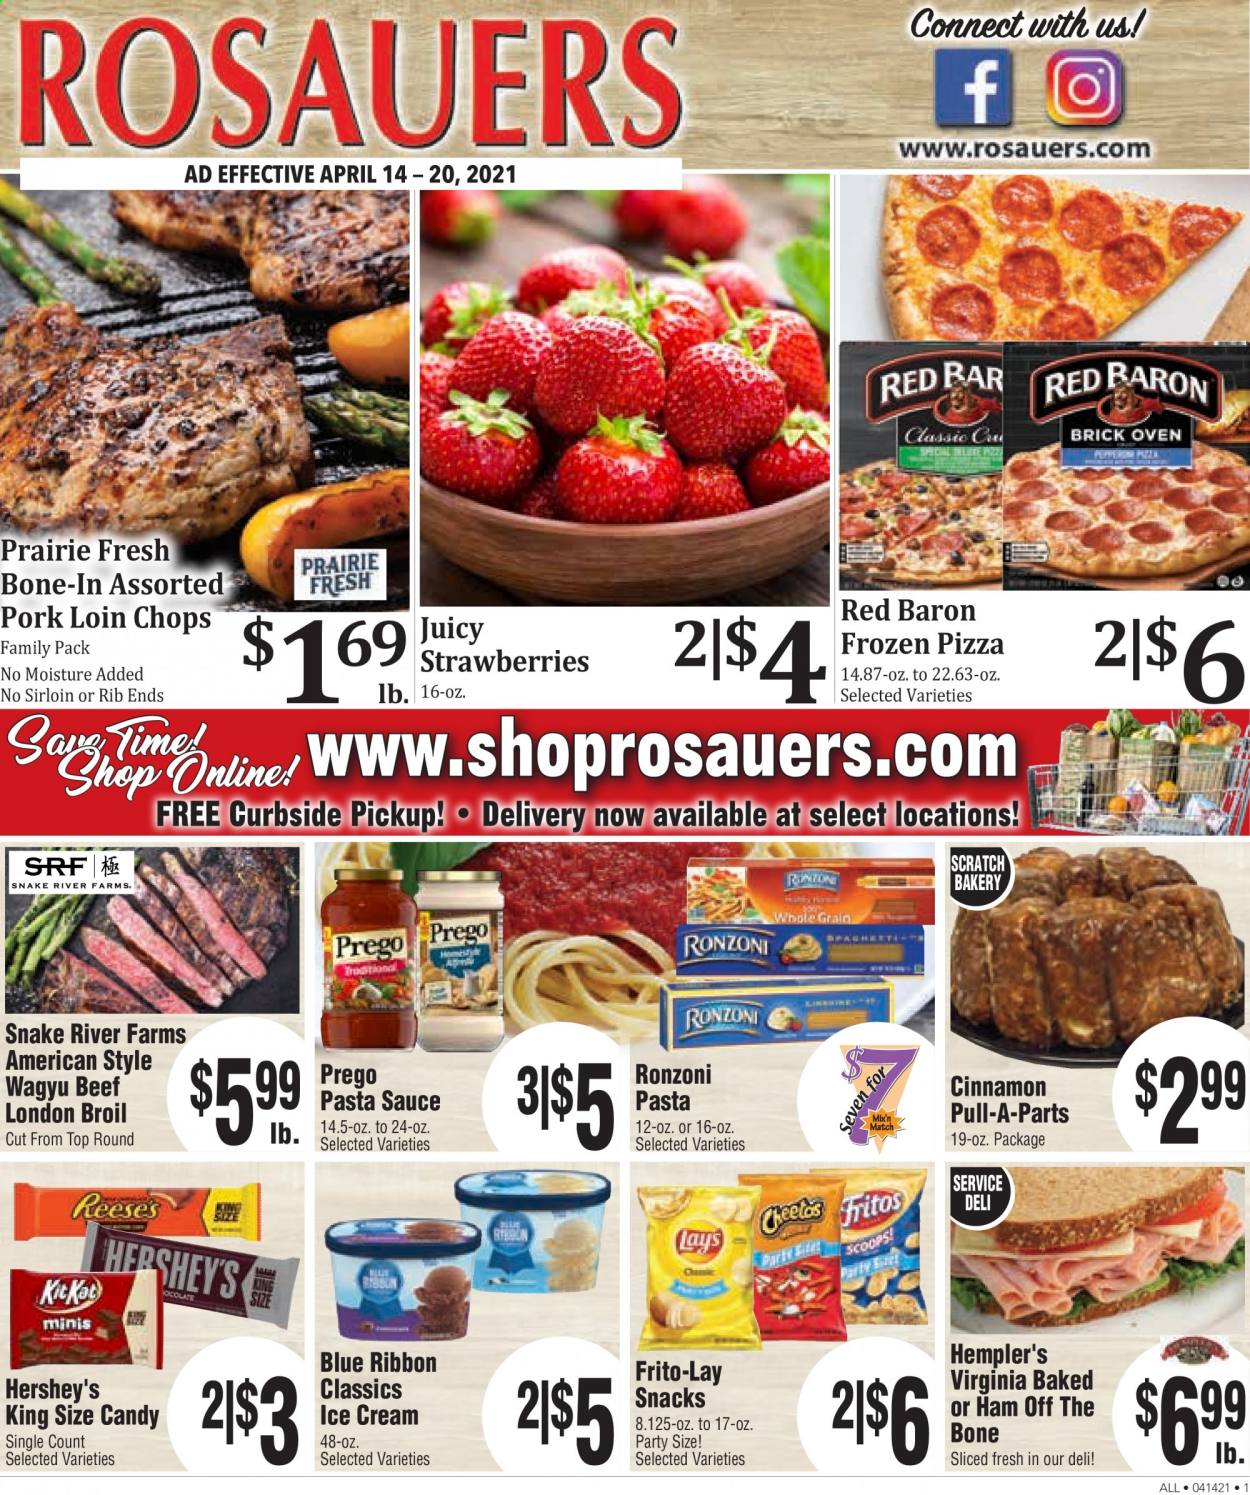 thumbnail - Rosauers Flyer - 04/14/2021 - 04/20/2021 - Sales products - strawberries, pizza, pasta sauce, sauce, ham off the bone, ice cream, Hershey's, Blue Ribbon, Red Baron, snack, Frito-Lay, cinnamon, pork chops, pork loin, pork meat. Page 1.